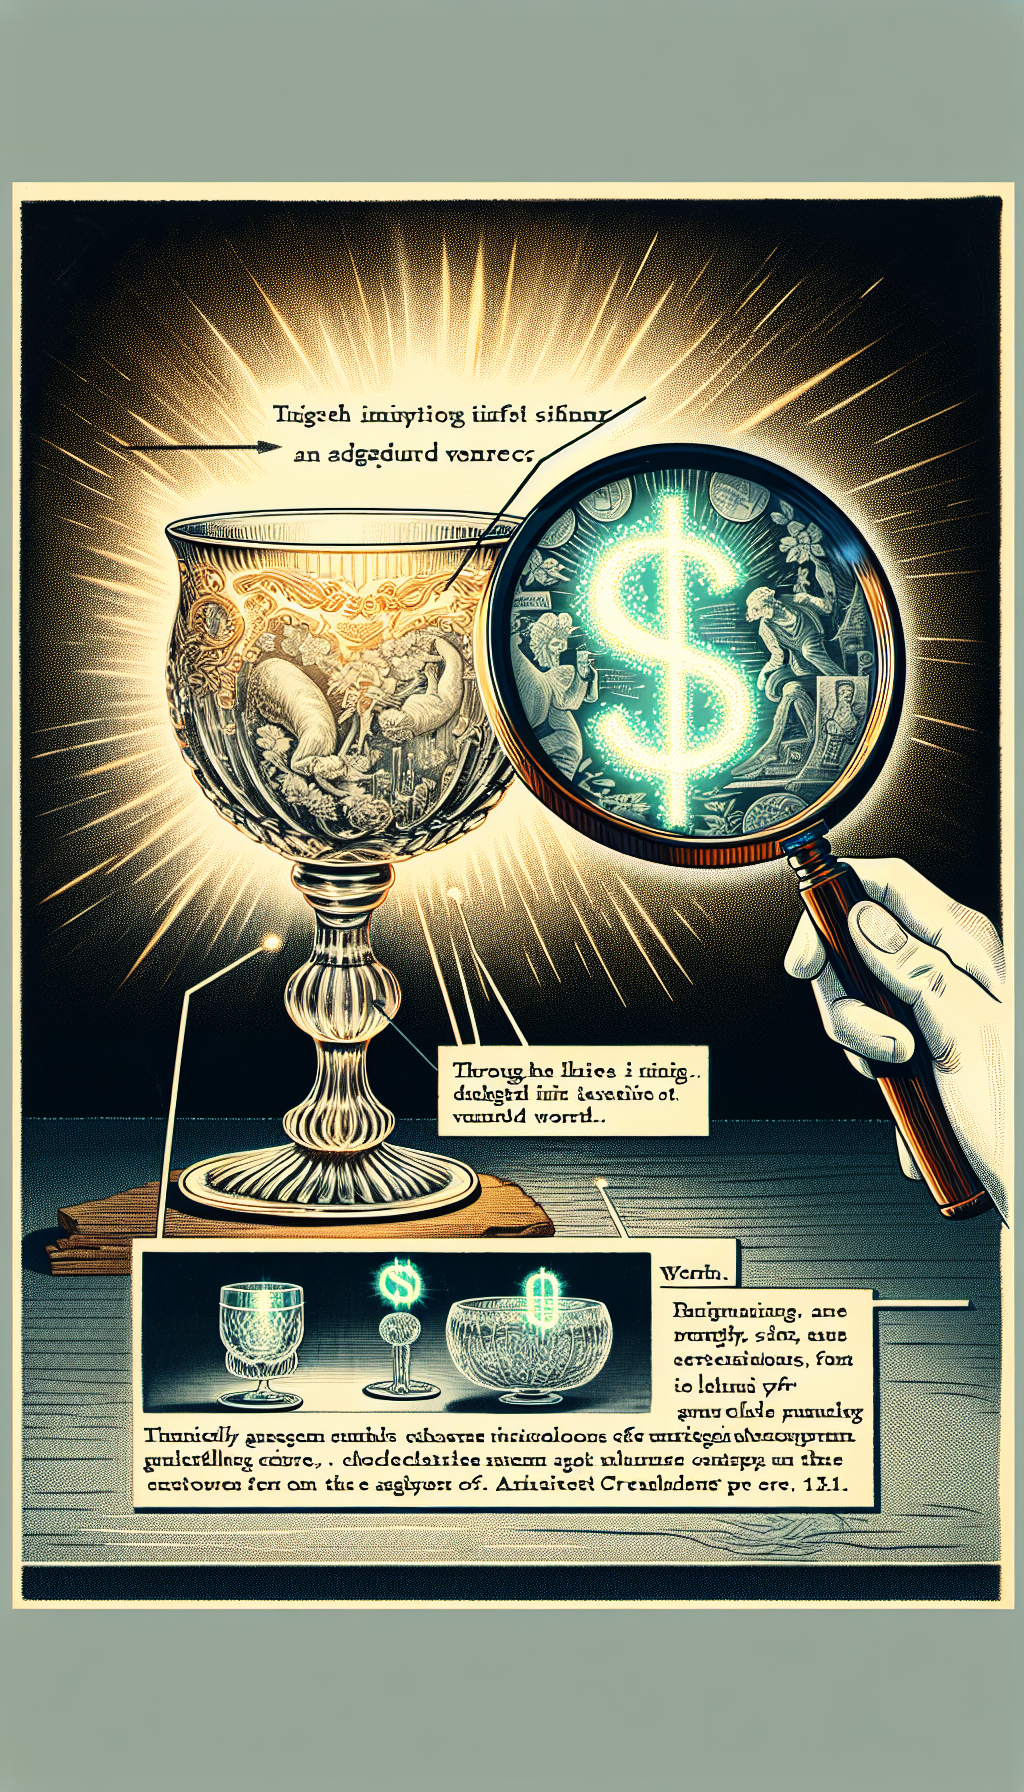 An illustration depicts a magnifying glass revealing hidden inscriptions on a luminous, ornate crystal goblet. The magnified script transitions into shimmering dollar symbols, blending antique charm with the impression of value. Delicate etchings on the glass surface subtly reflect famous artist signatures, emphasizing the treasure hunt for provenance and price in the world of antique crystal collecting.